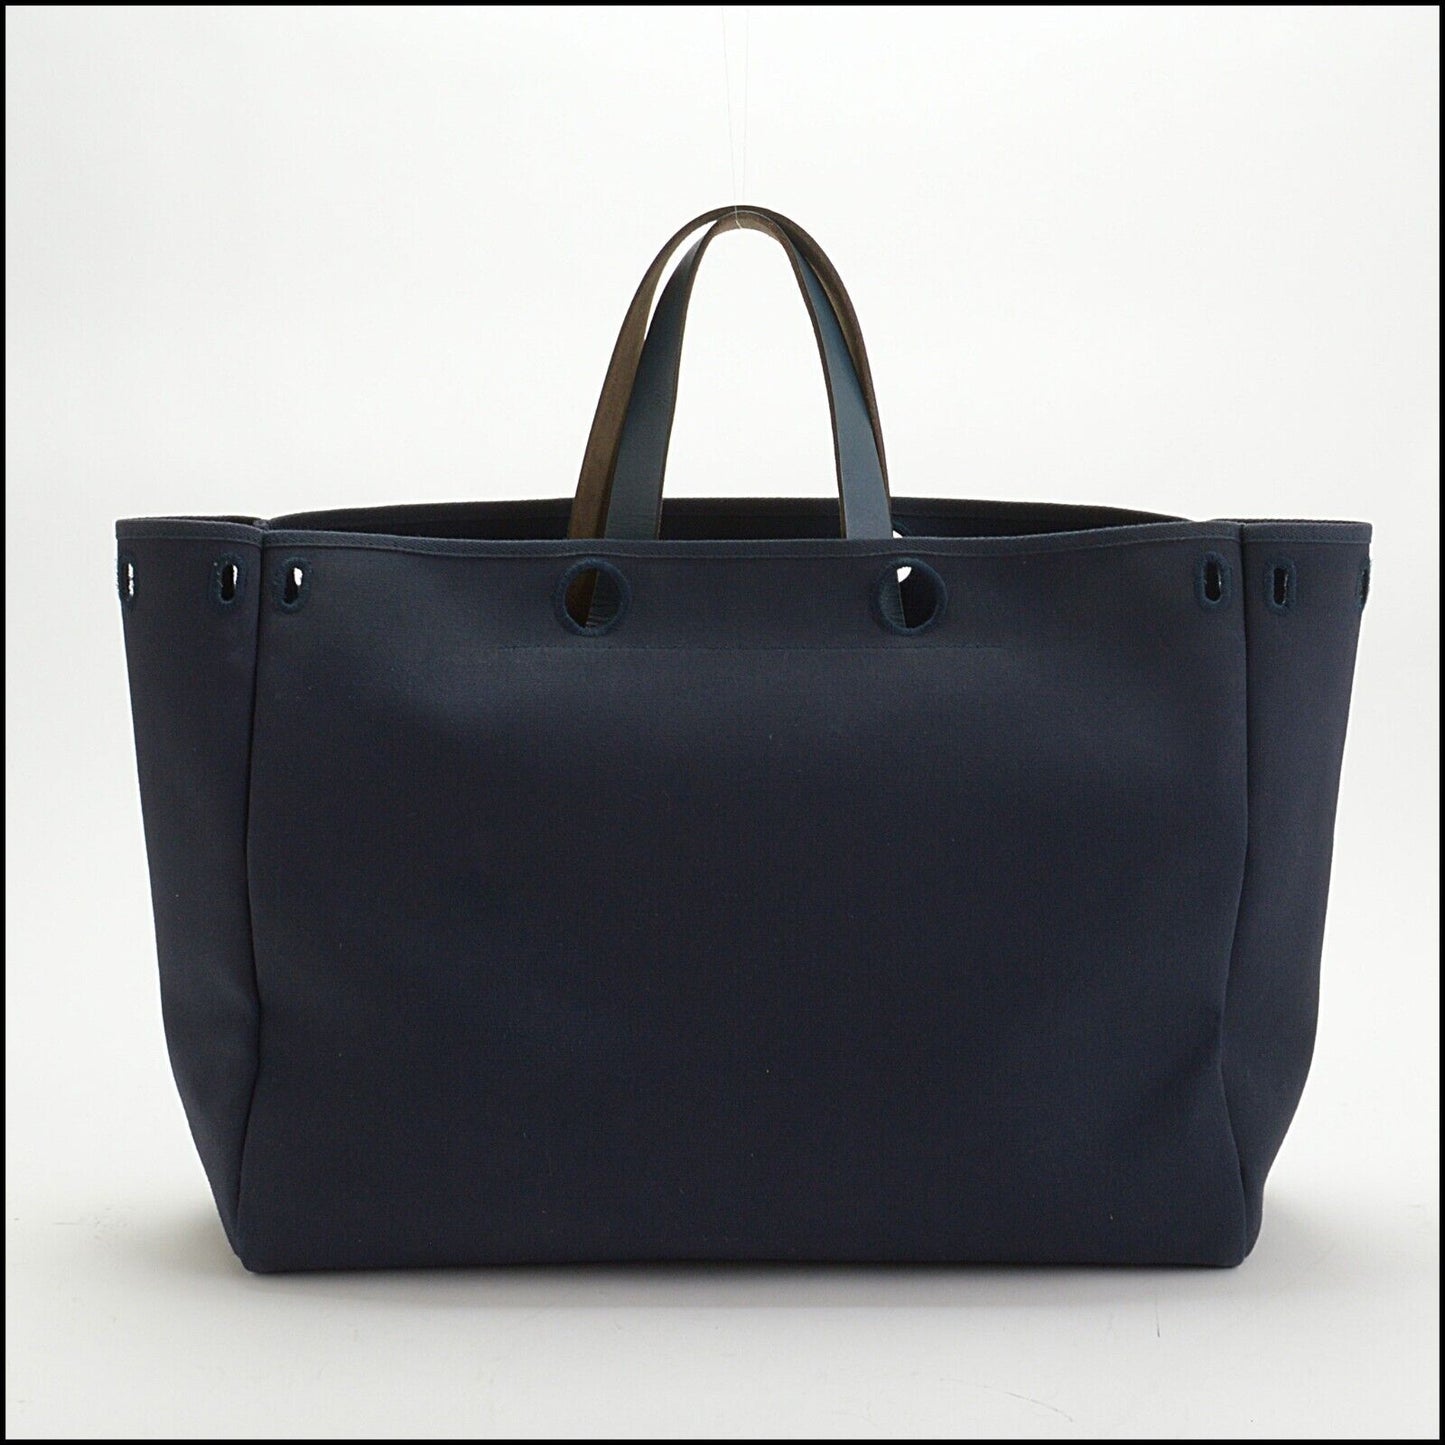 RDC13748 Authentic HERMES '02 Navy Blue Canvas & Leather Herbag Tote 40cm Bag